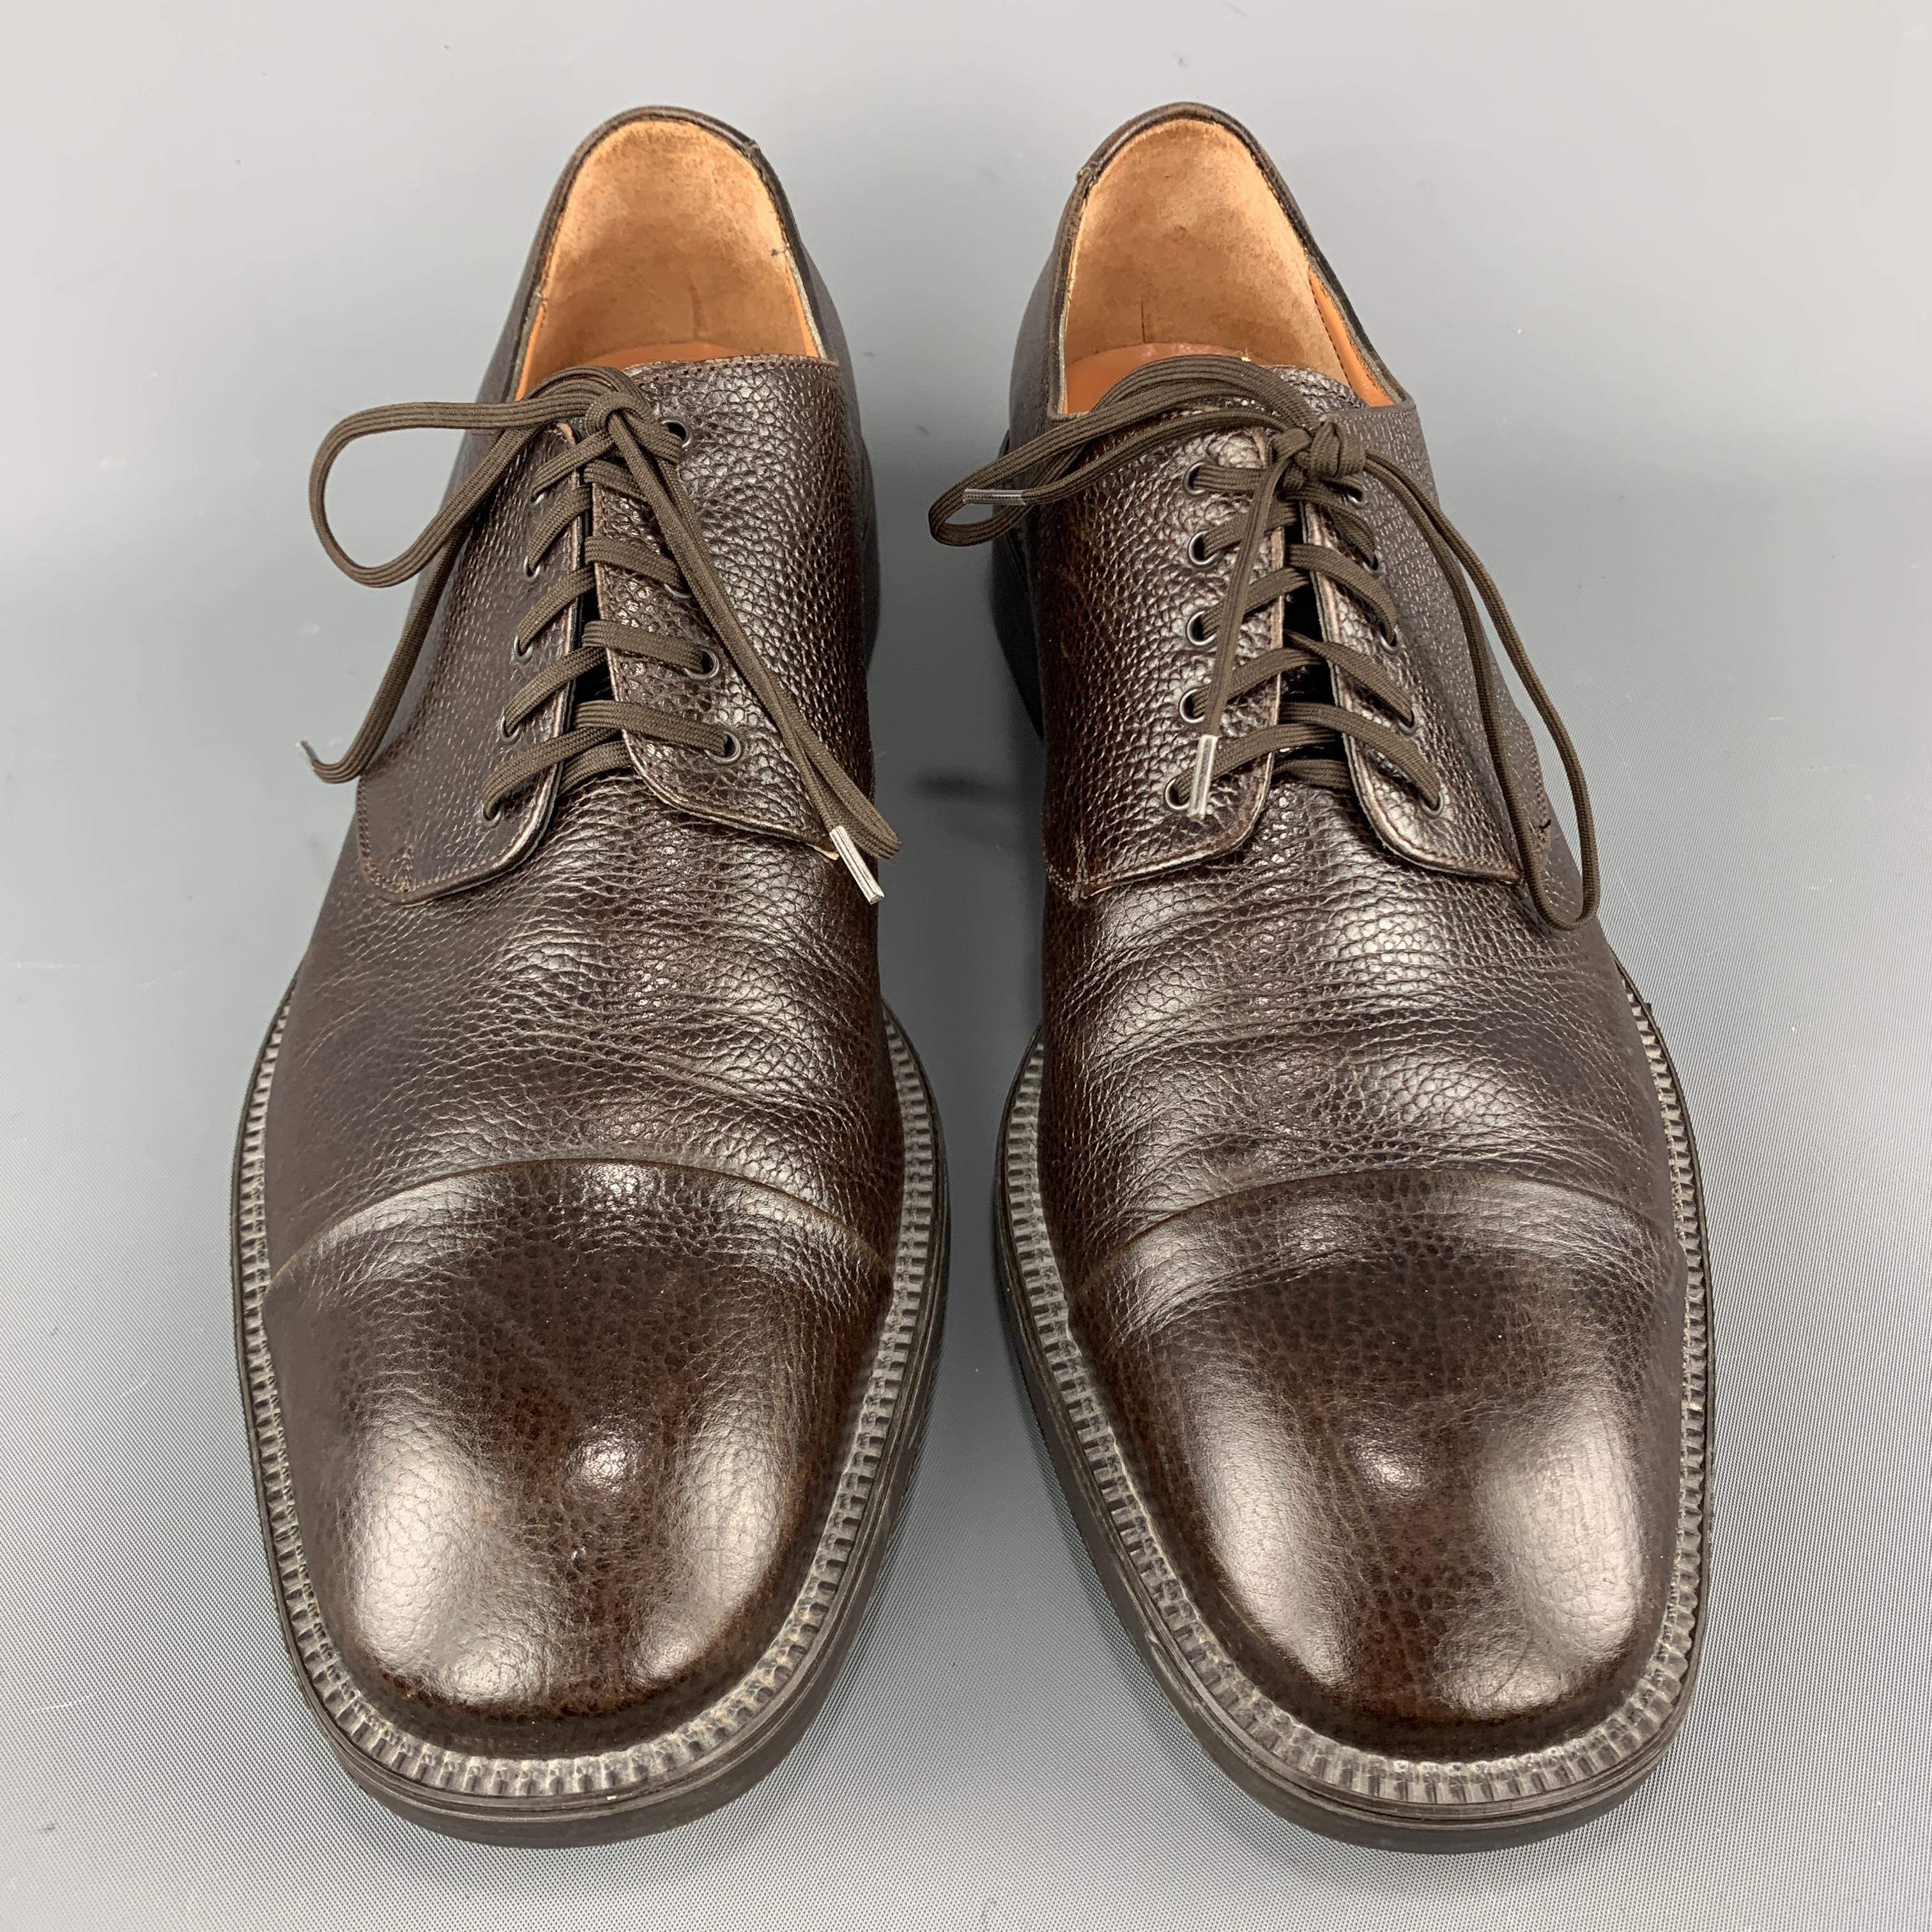 SALVATORE FERRAGAMO dress shoes come in brown textured leather with a toe cap and rubber sole.  Made in Italy.

Excellent Pre-Owned Condition.
Marked: 11

Outsole: 12.5 x 4.5 in.